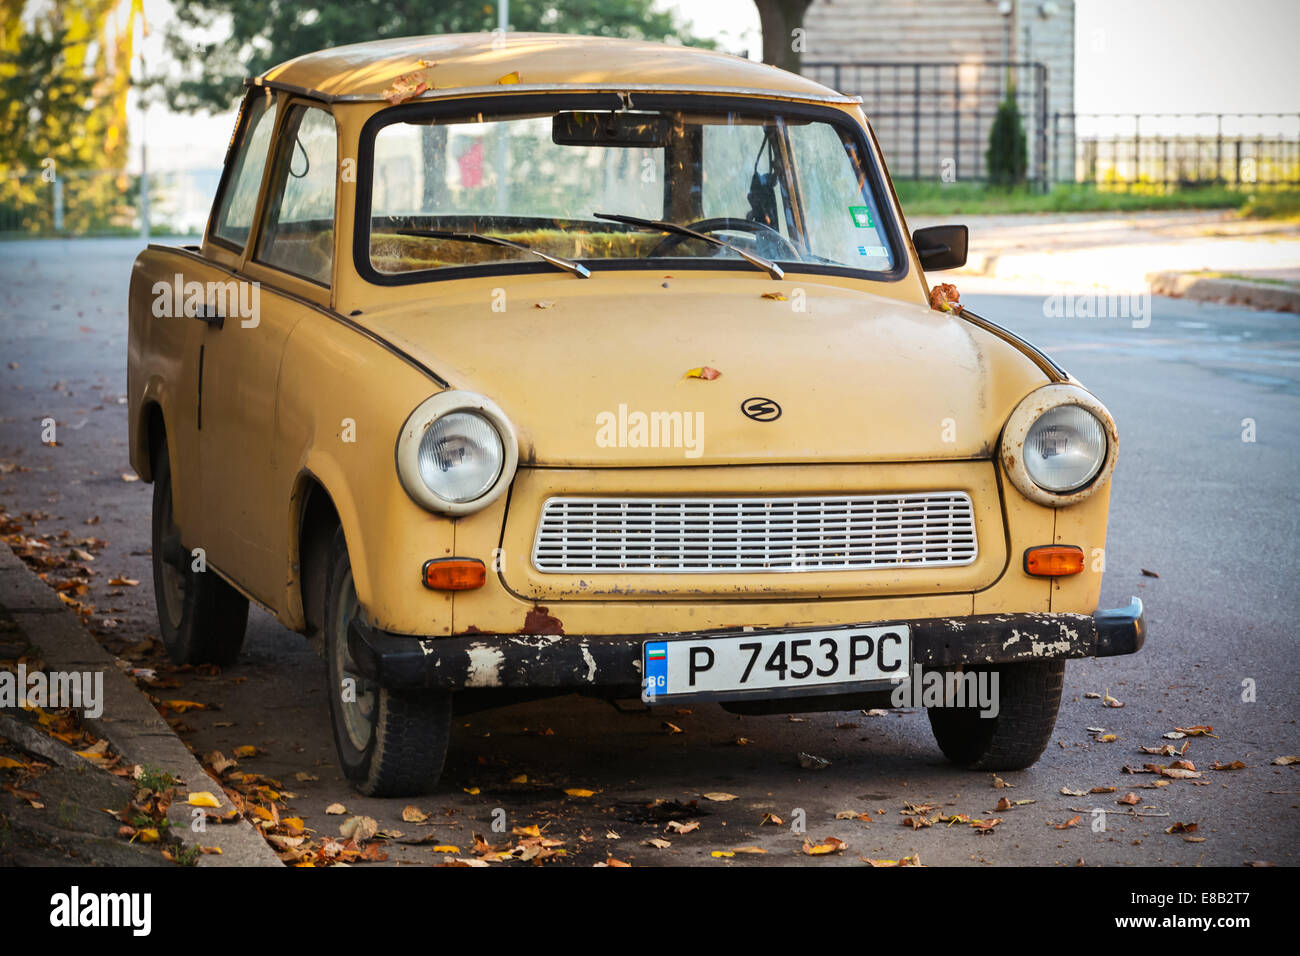 RUSE, BULGARIA - SEPTEMBER 29, 2014: Old yellow Trabant 601s car stands parked on a street side Stock Photo